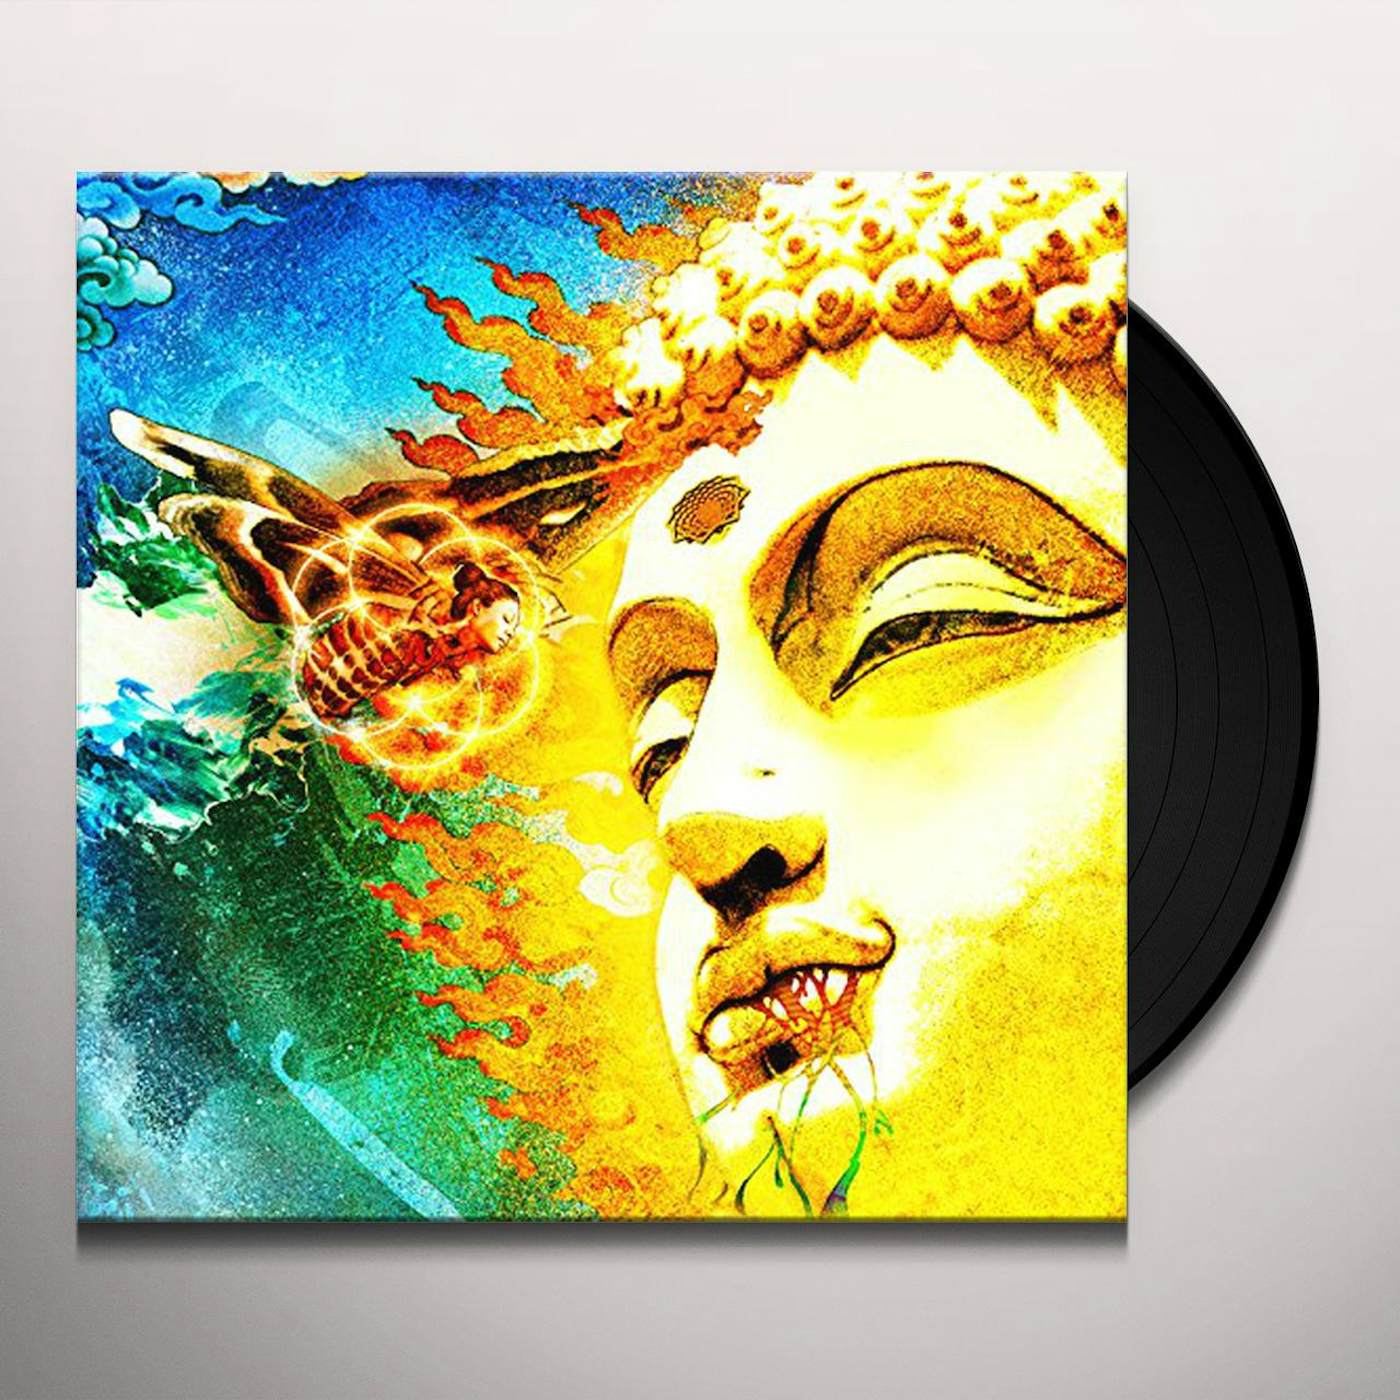 Rikard Sjoblom ON HER JOURNEY TO THE SUN: SPECIAL EDITION Vinyl Record